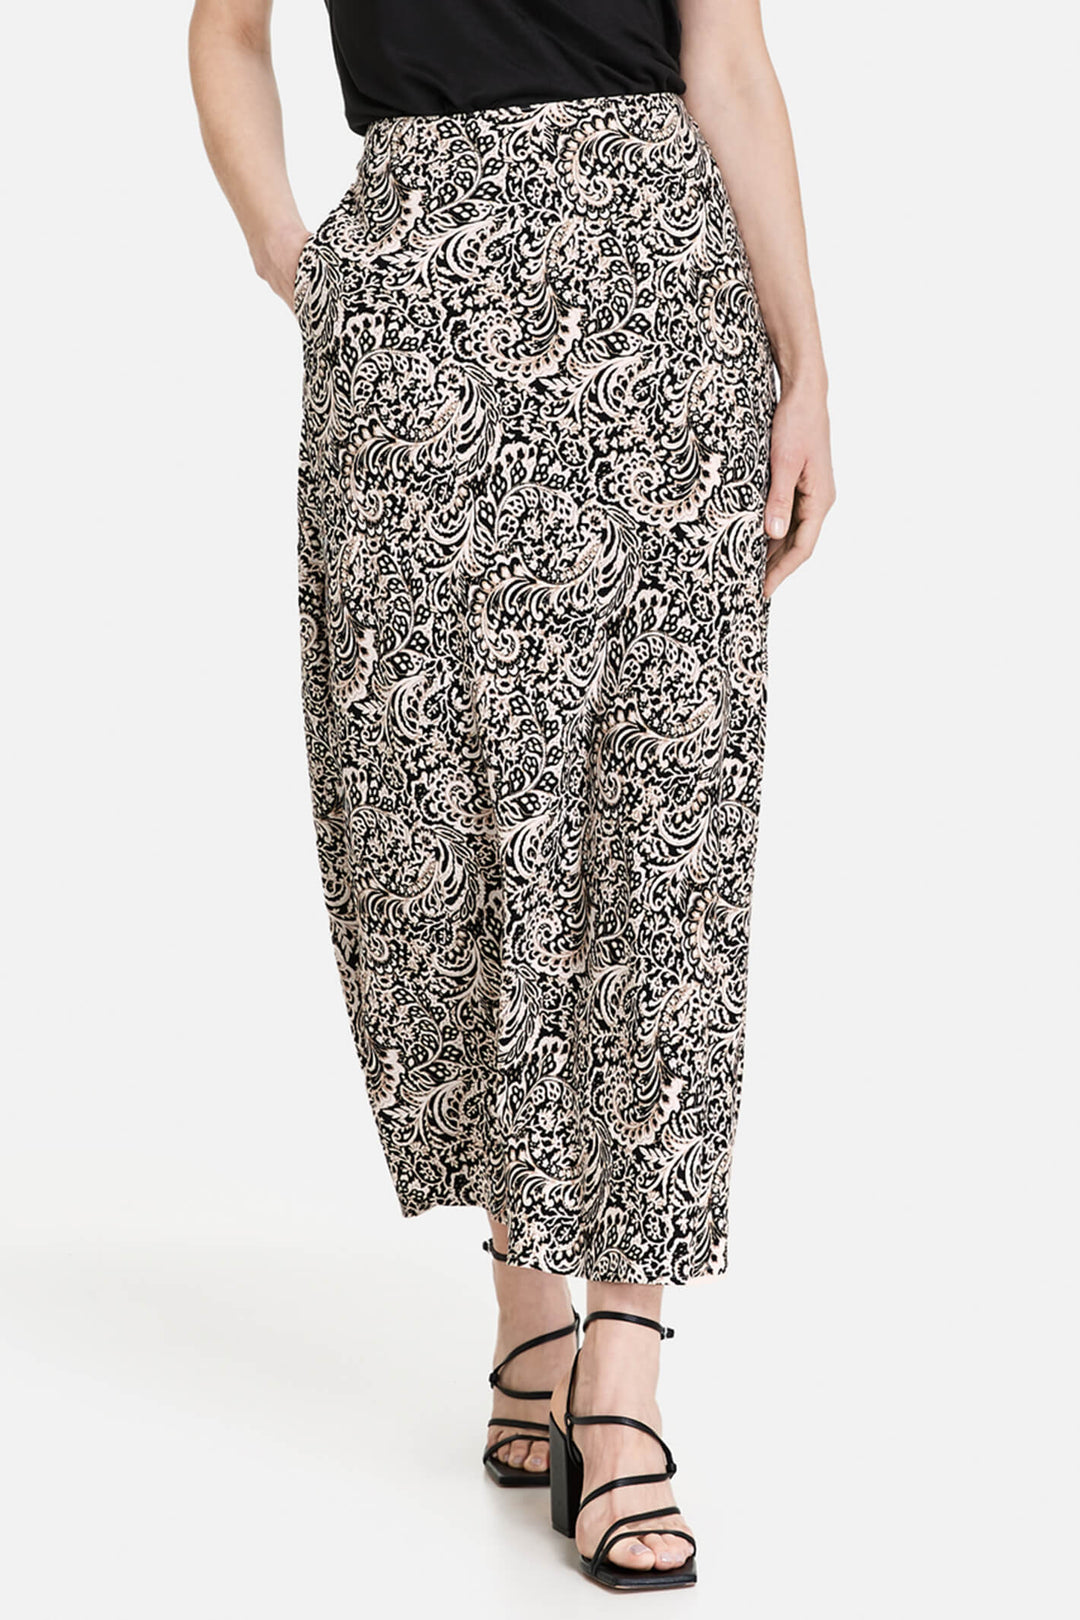 Sale Skirts – Experience